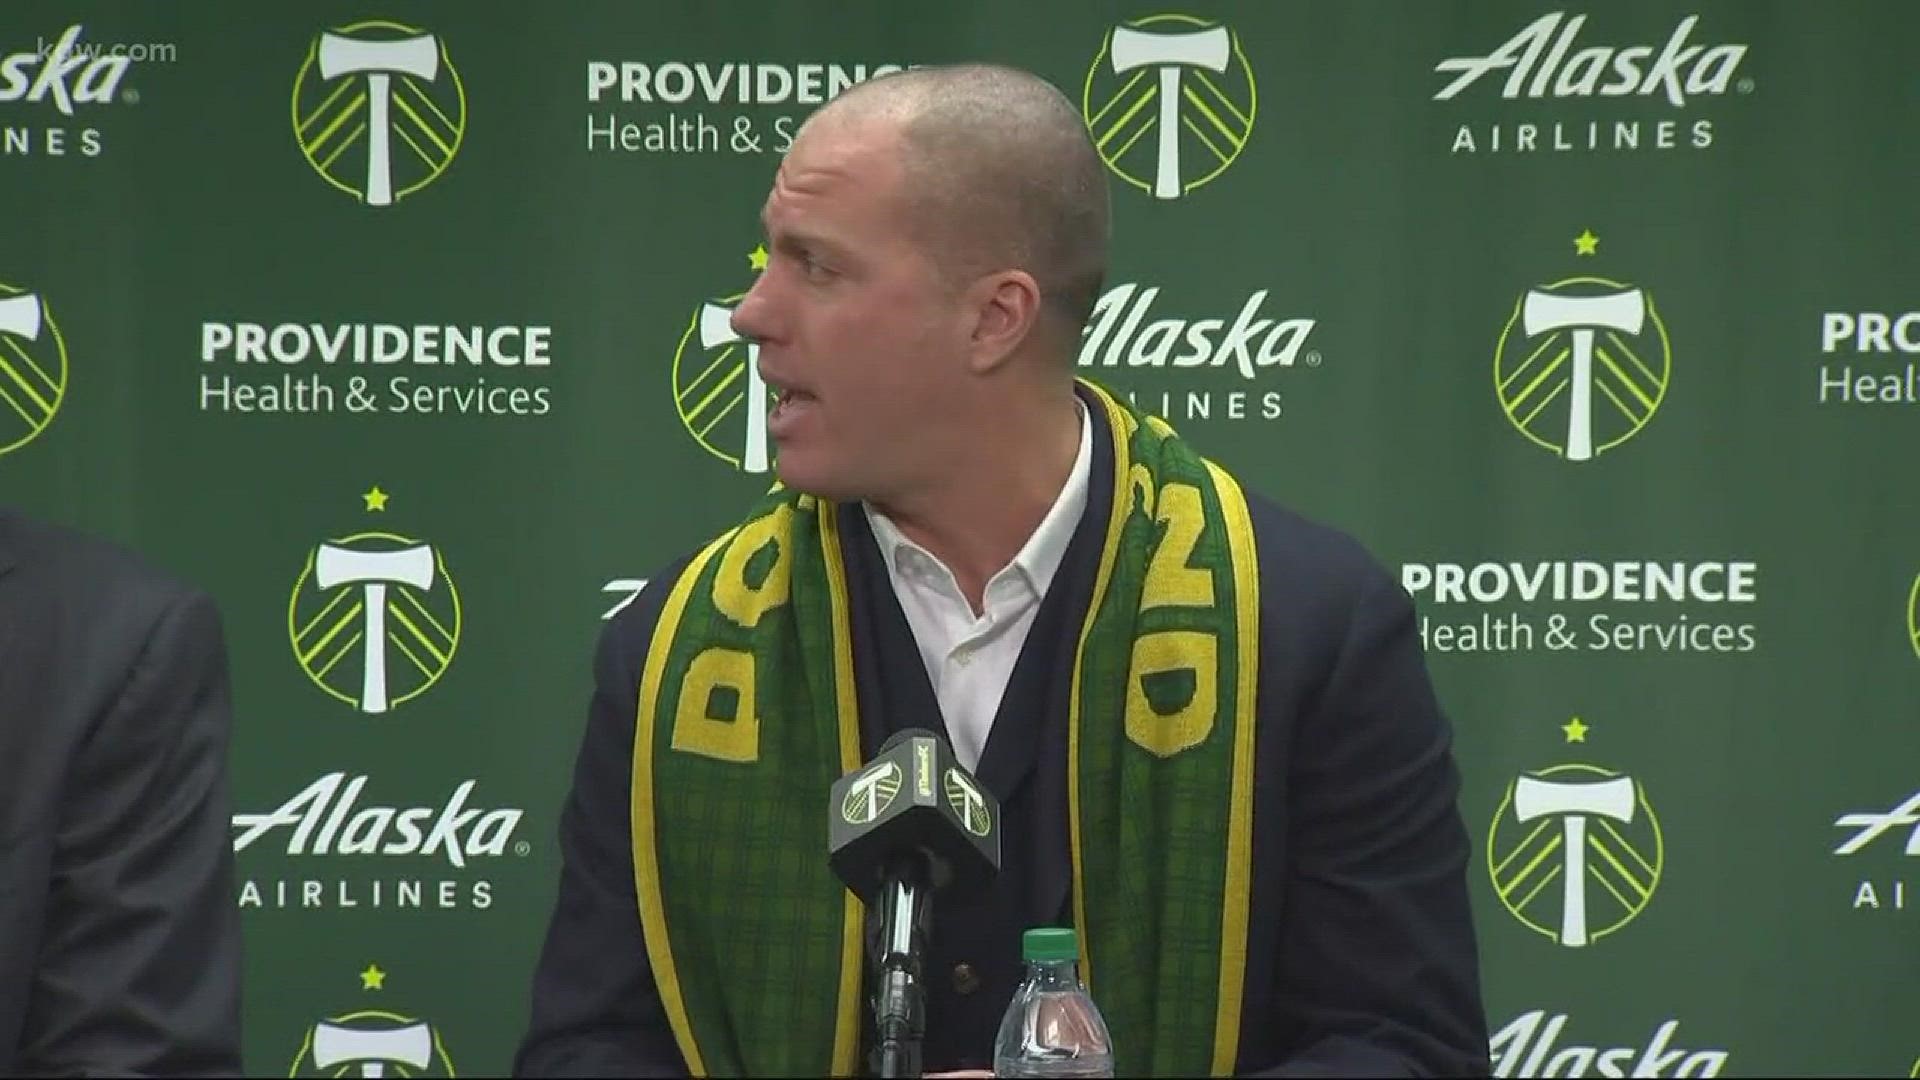 The new coach of the Portland Timbers was introduced Monday.